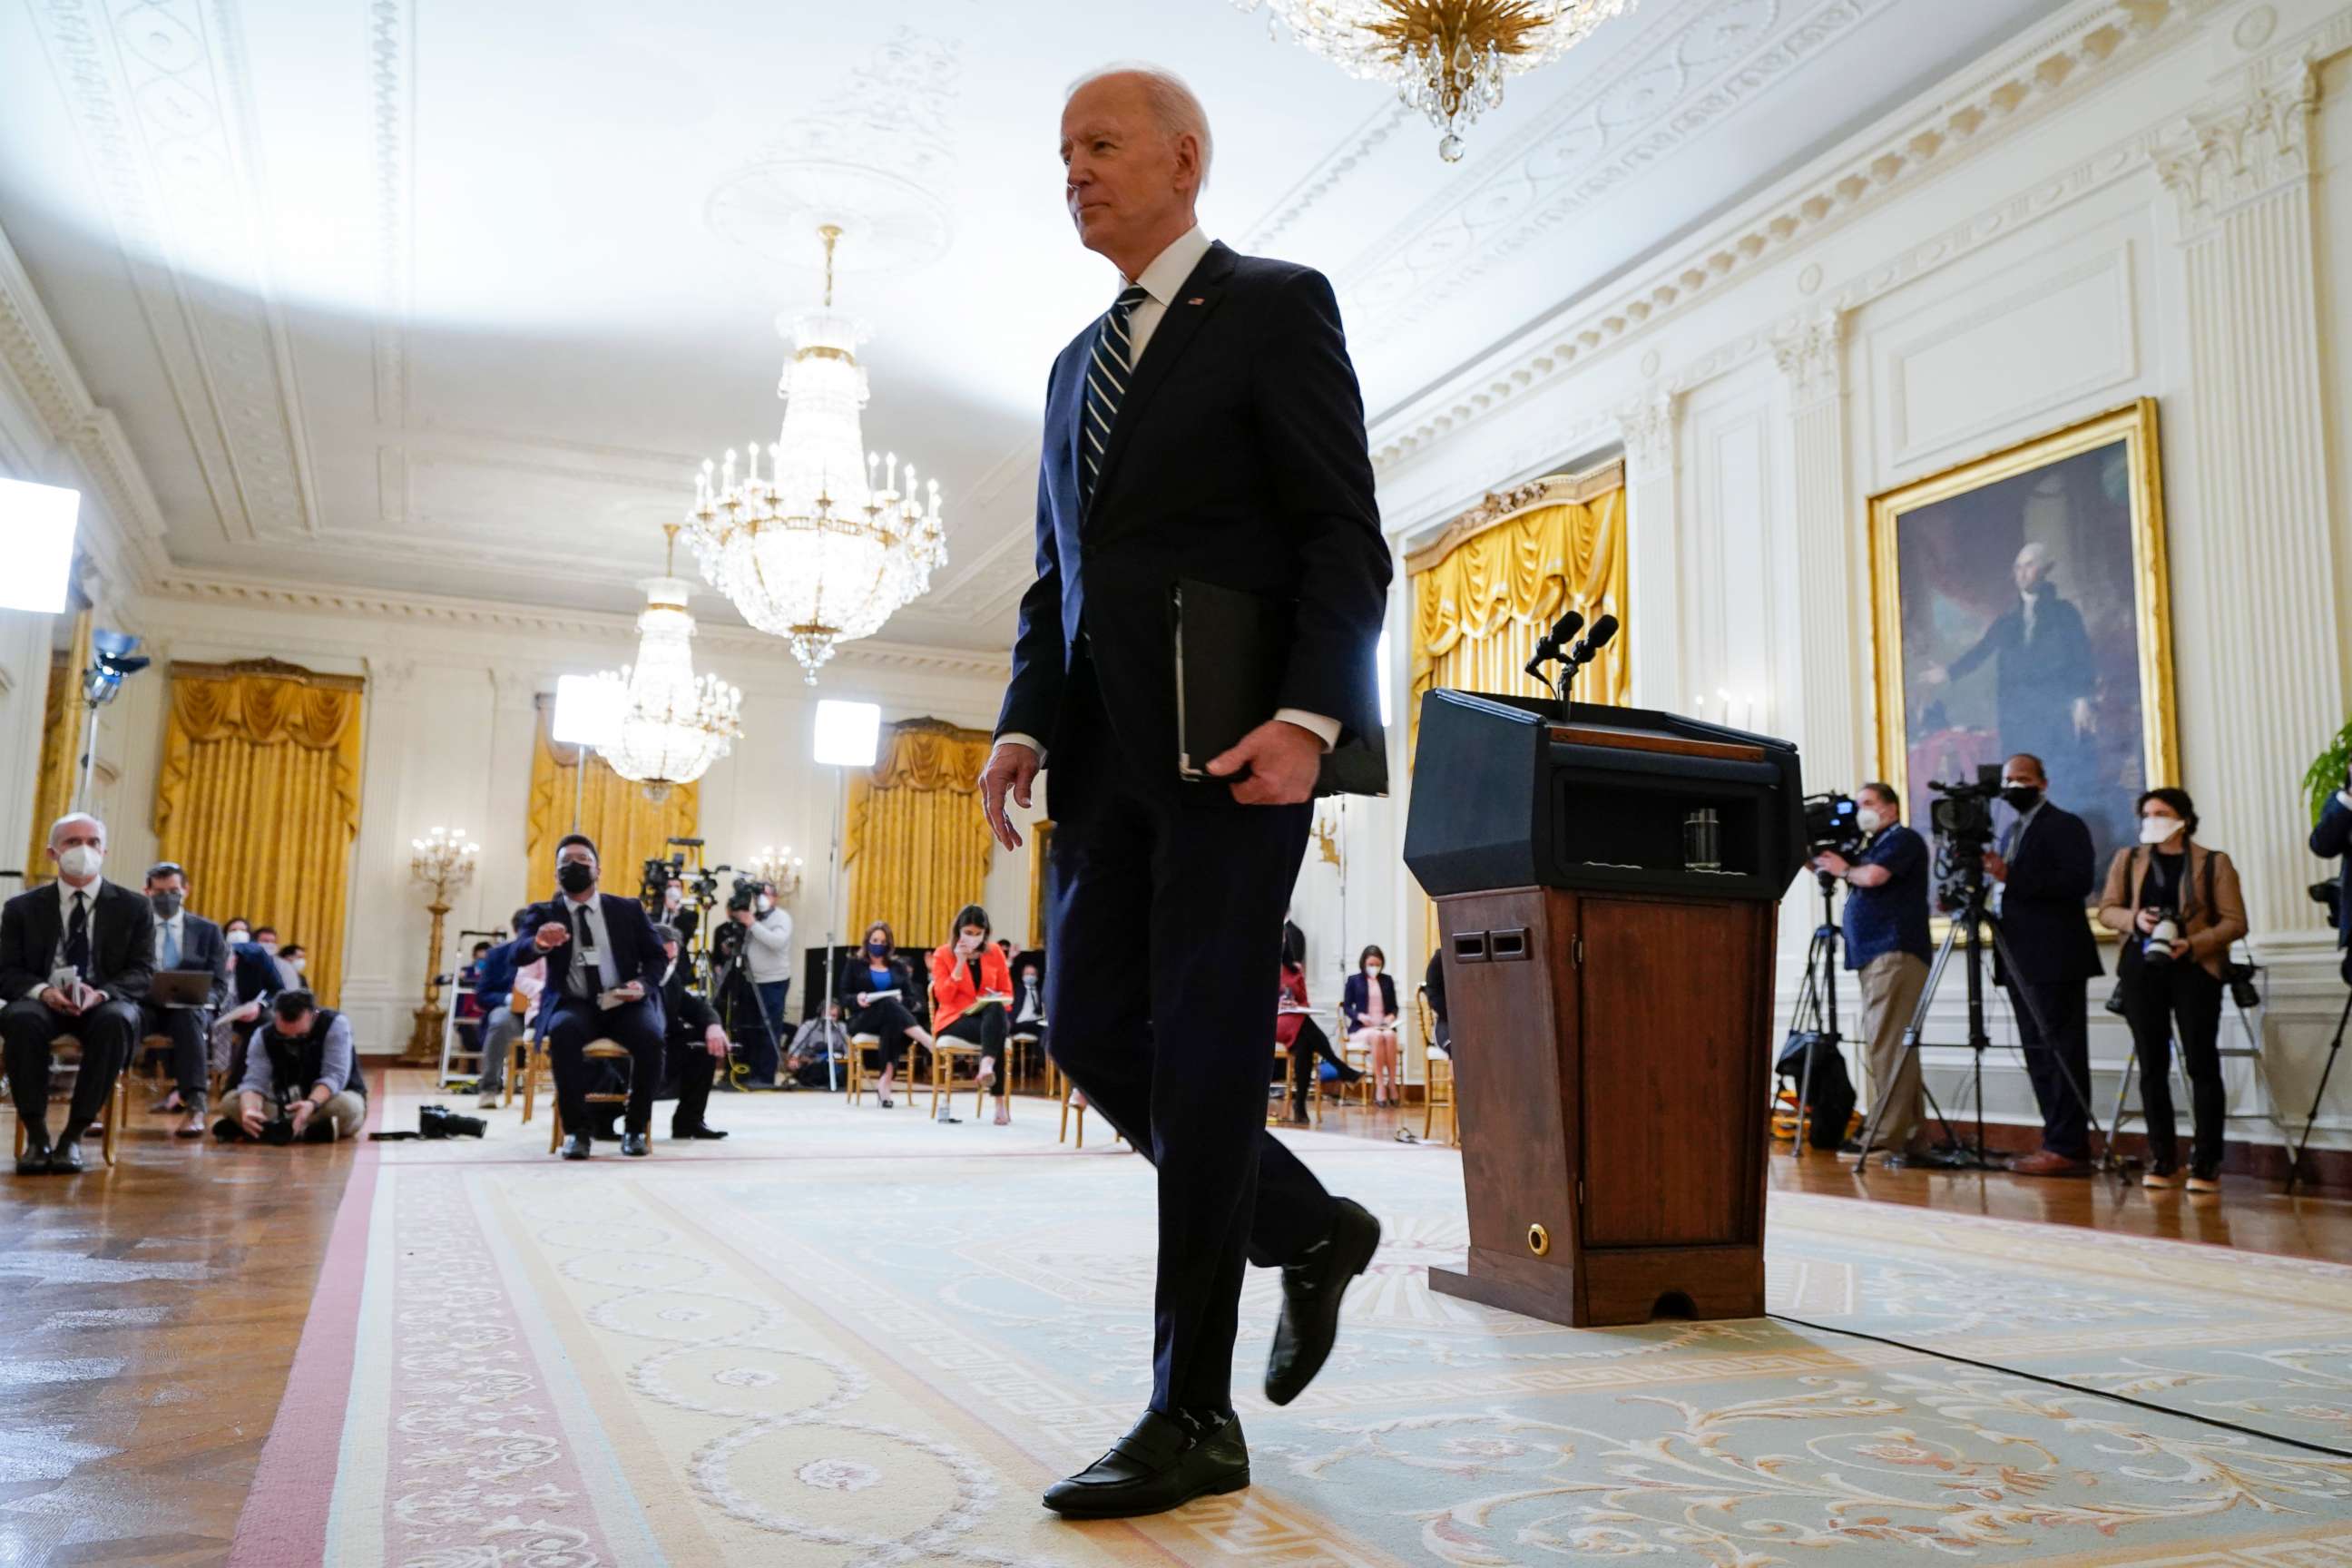 PHOTO: President Joe Biden leaves after speaking at a news conference in the East Room of the White House on March 25, 2021 in Washington.